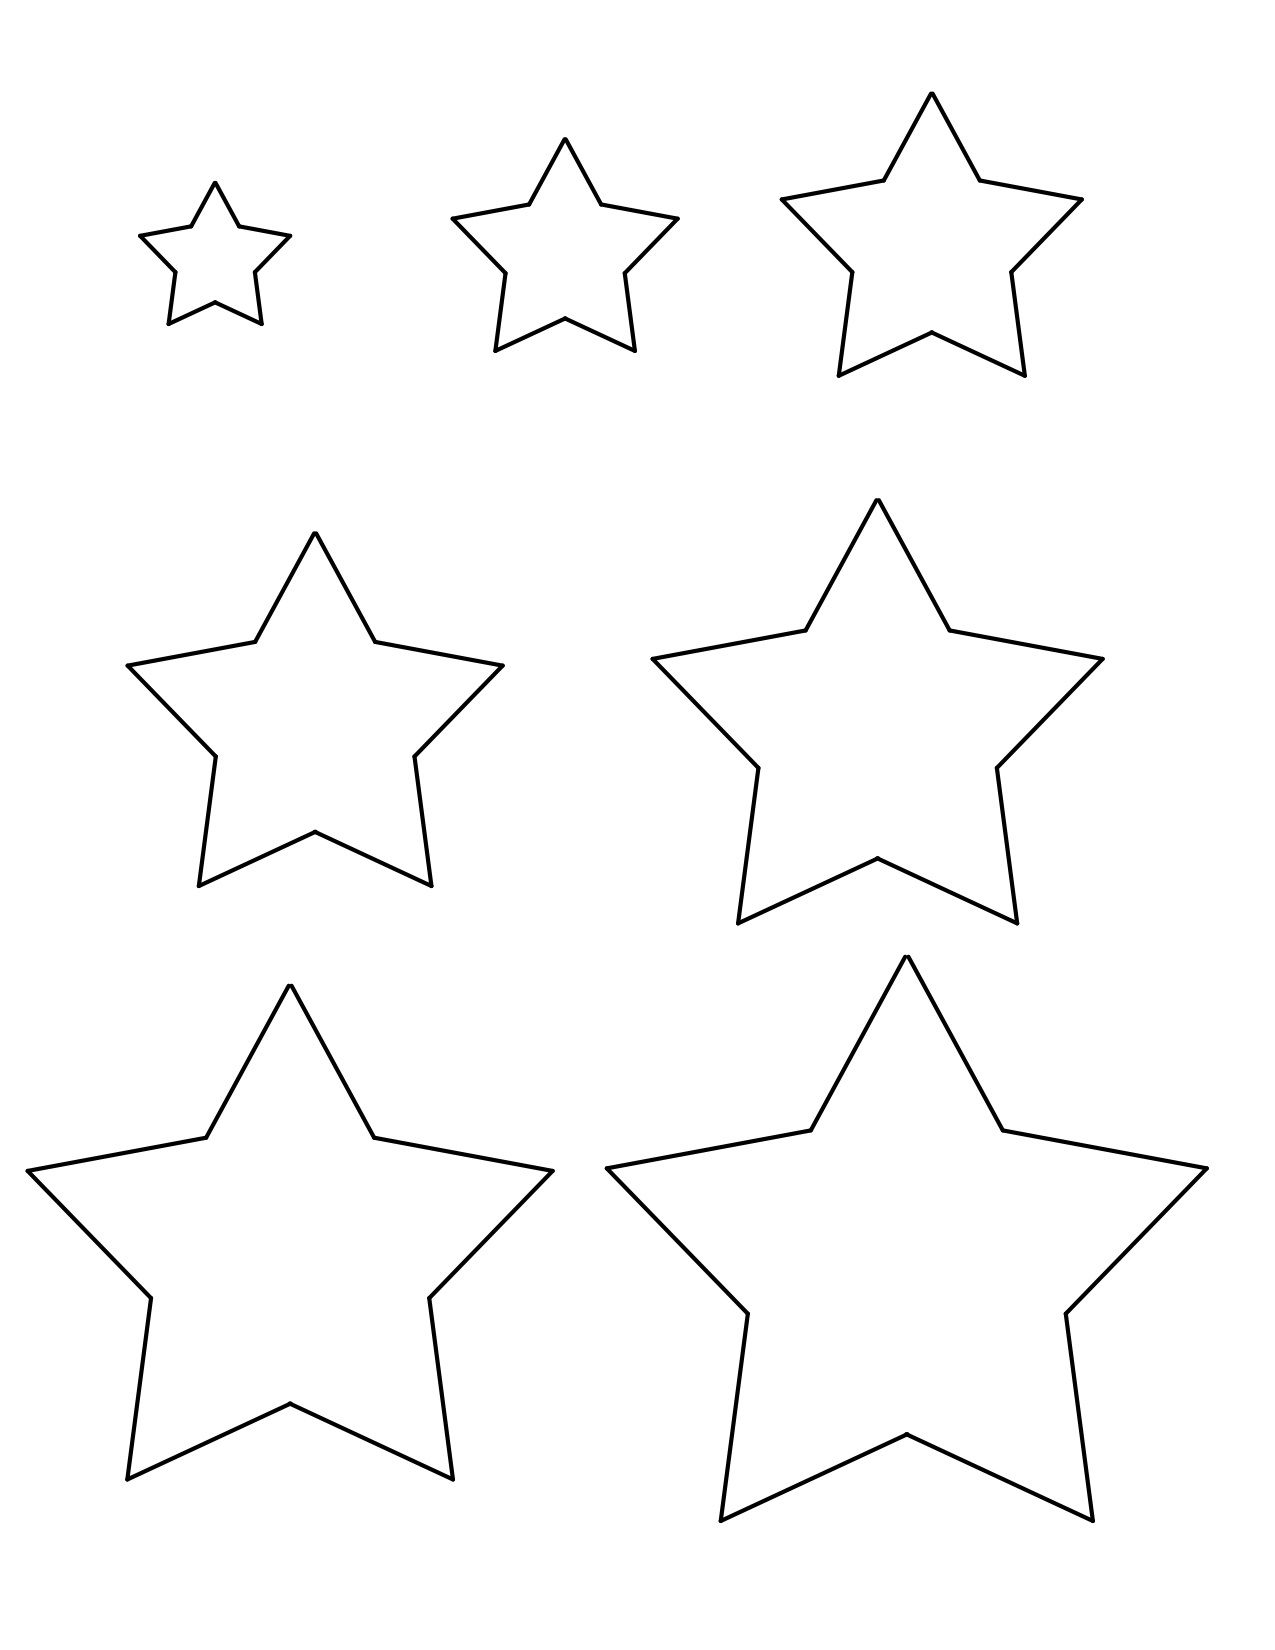 Stars in different sizes